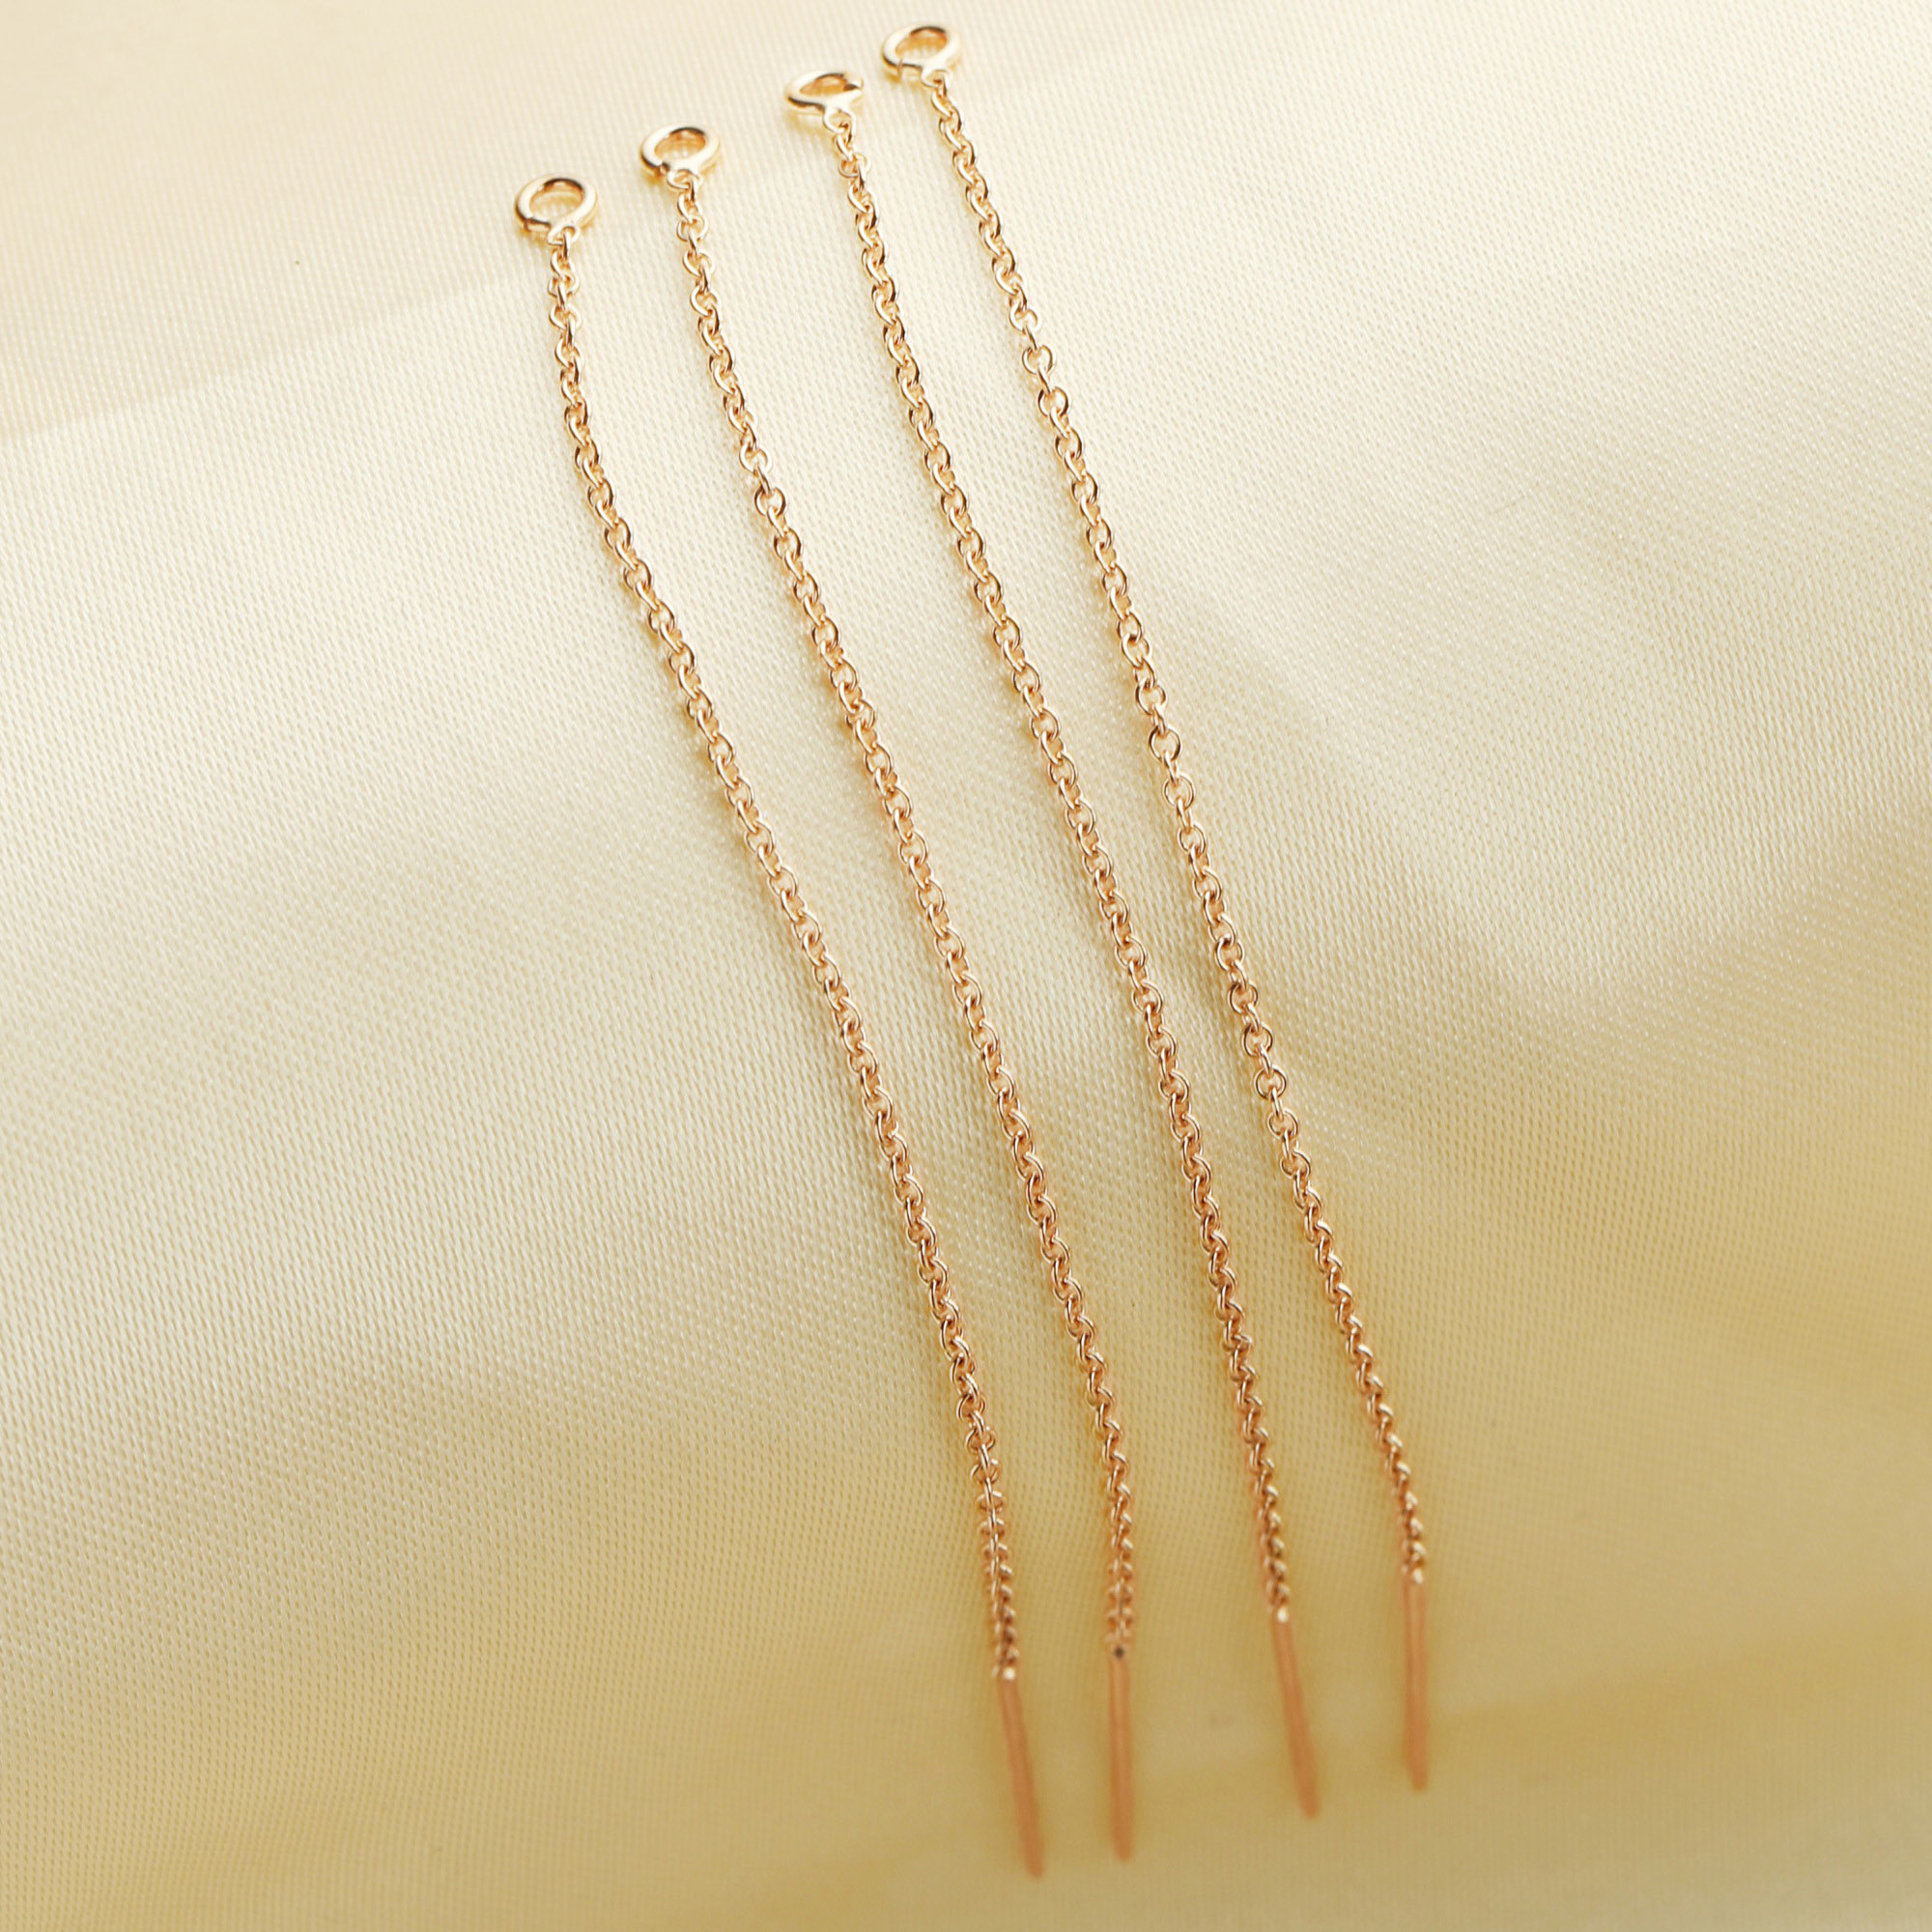 1Pair 8CM Long Minimalist Ear Threader Earringss,14k Rose Gold Filled Earrings,Ear Threader With Cable Chain,Simple Earrings,Long Ear Threads Earrings 1513005 - Click Image to Close